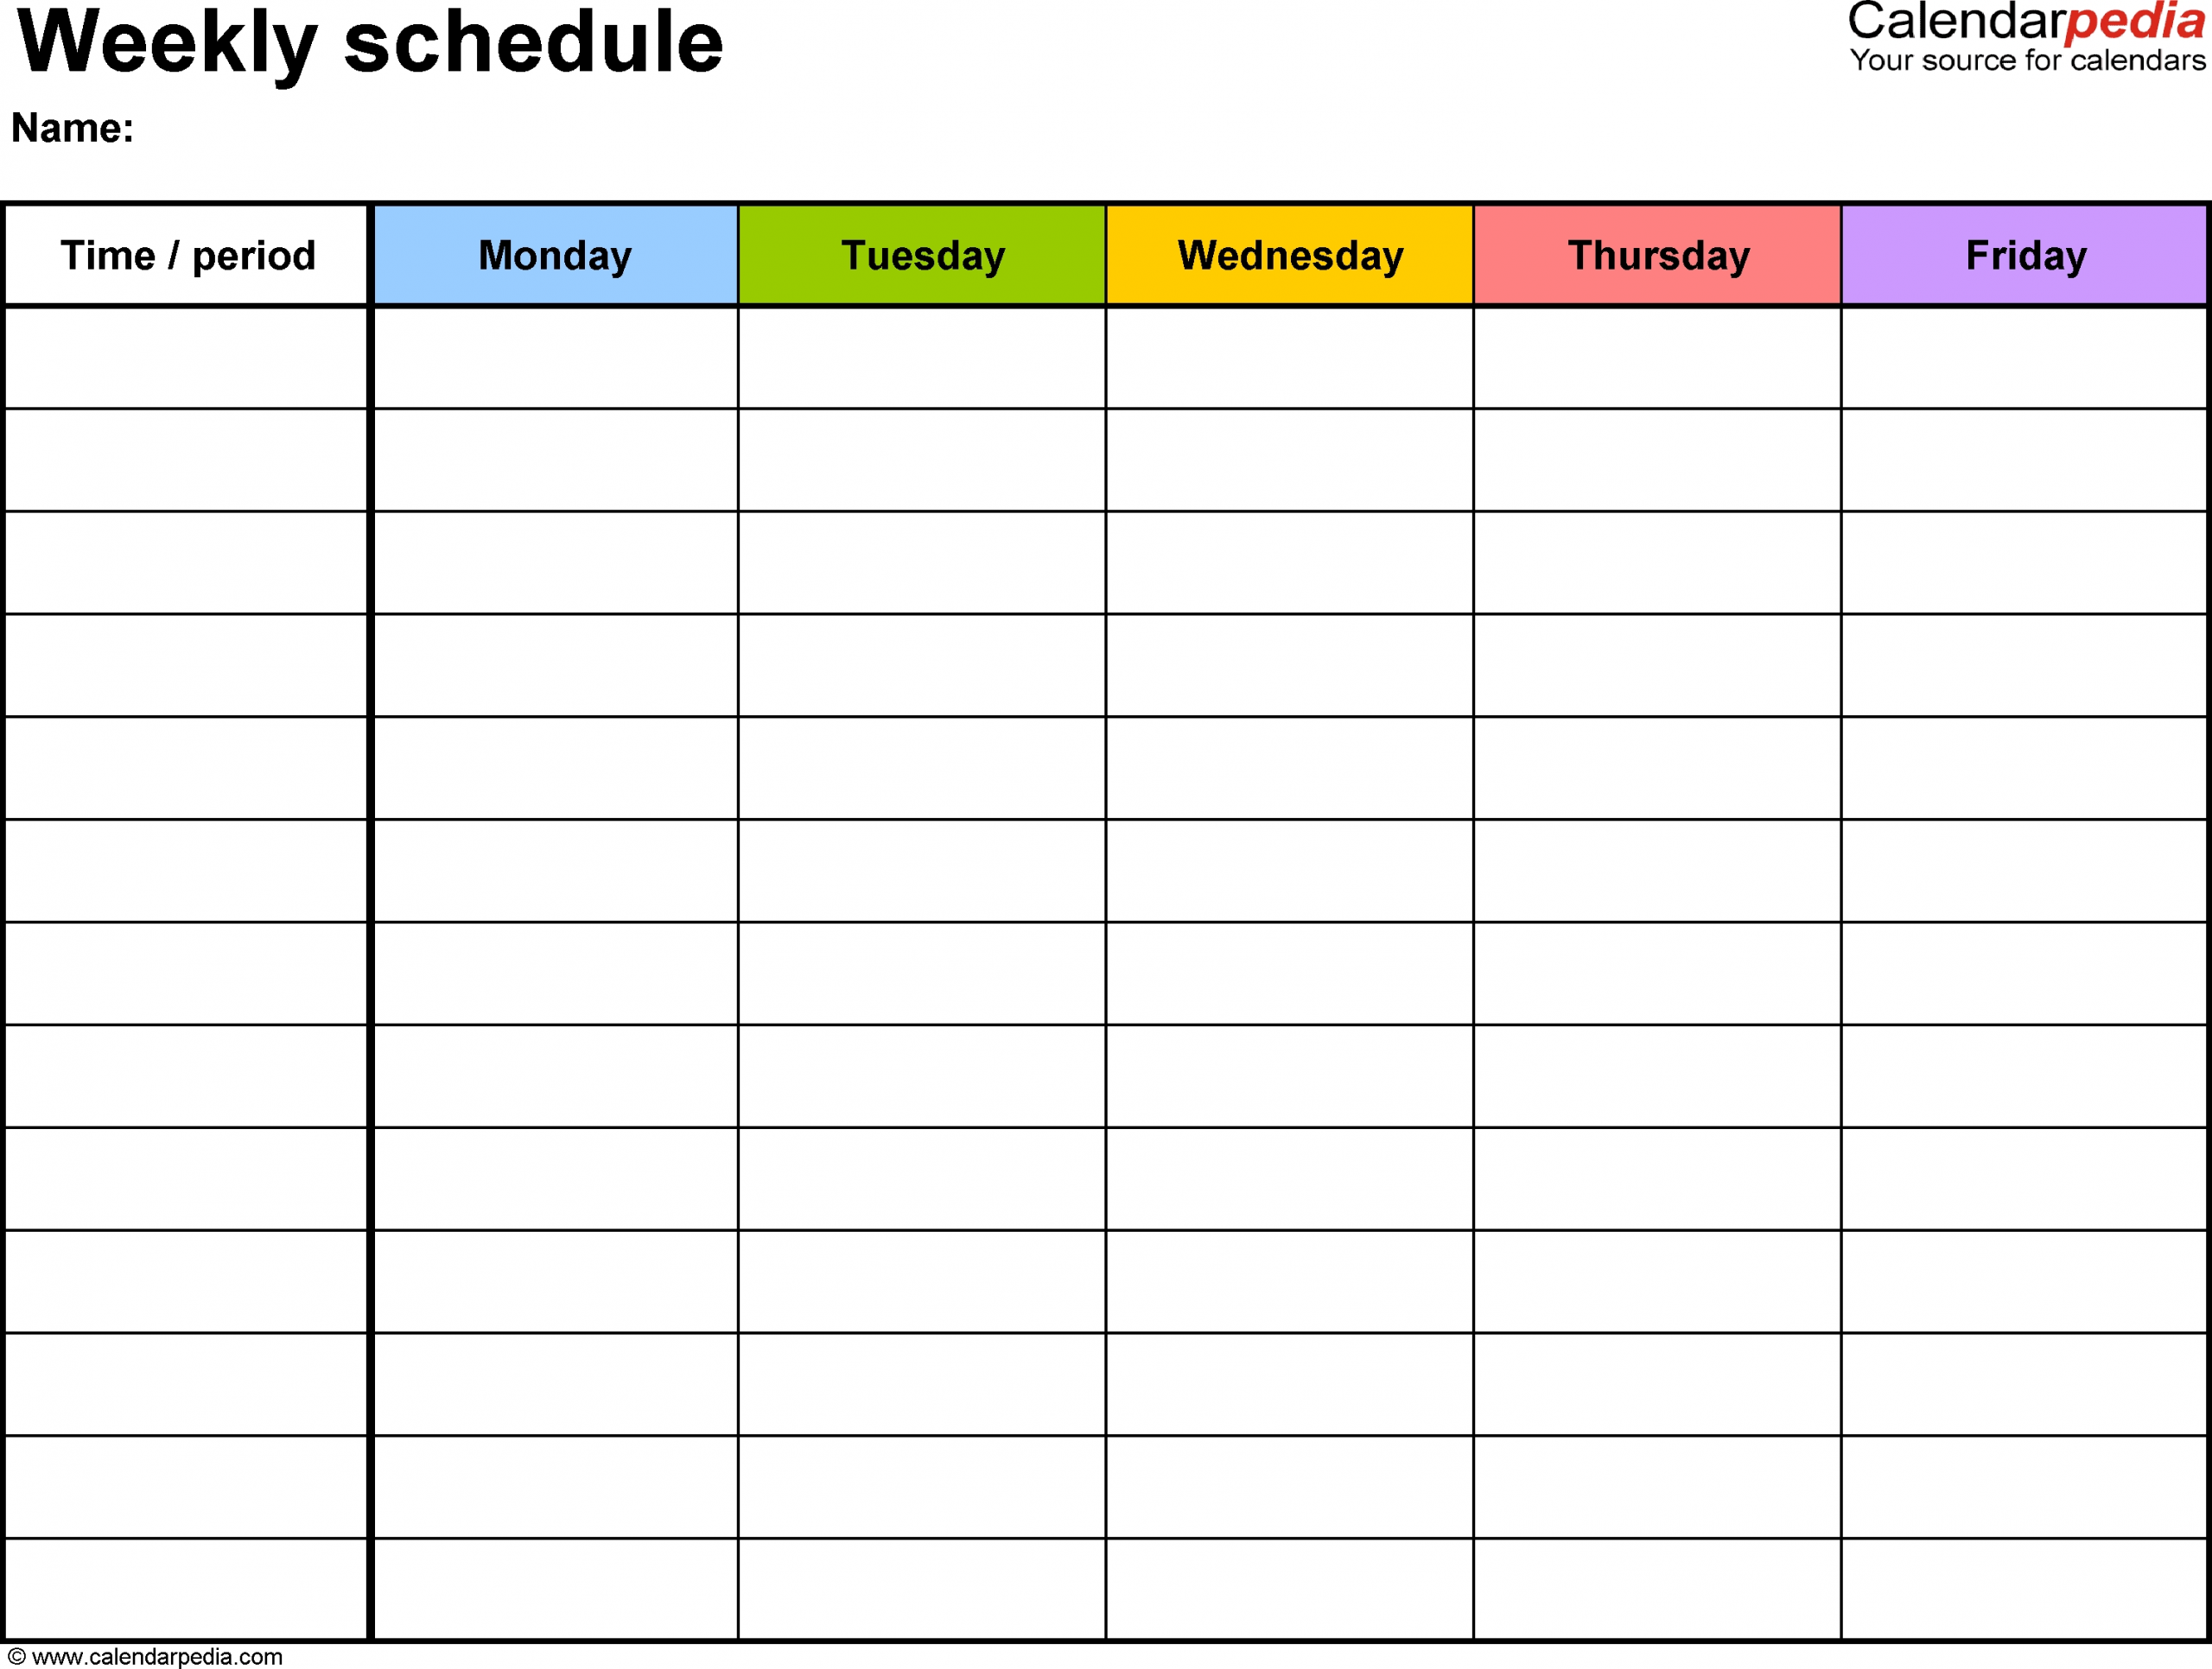 Free Weekly Schedule Templates For Word - 18 Templates with regard to Monday Through Friday Schedule Template Free